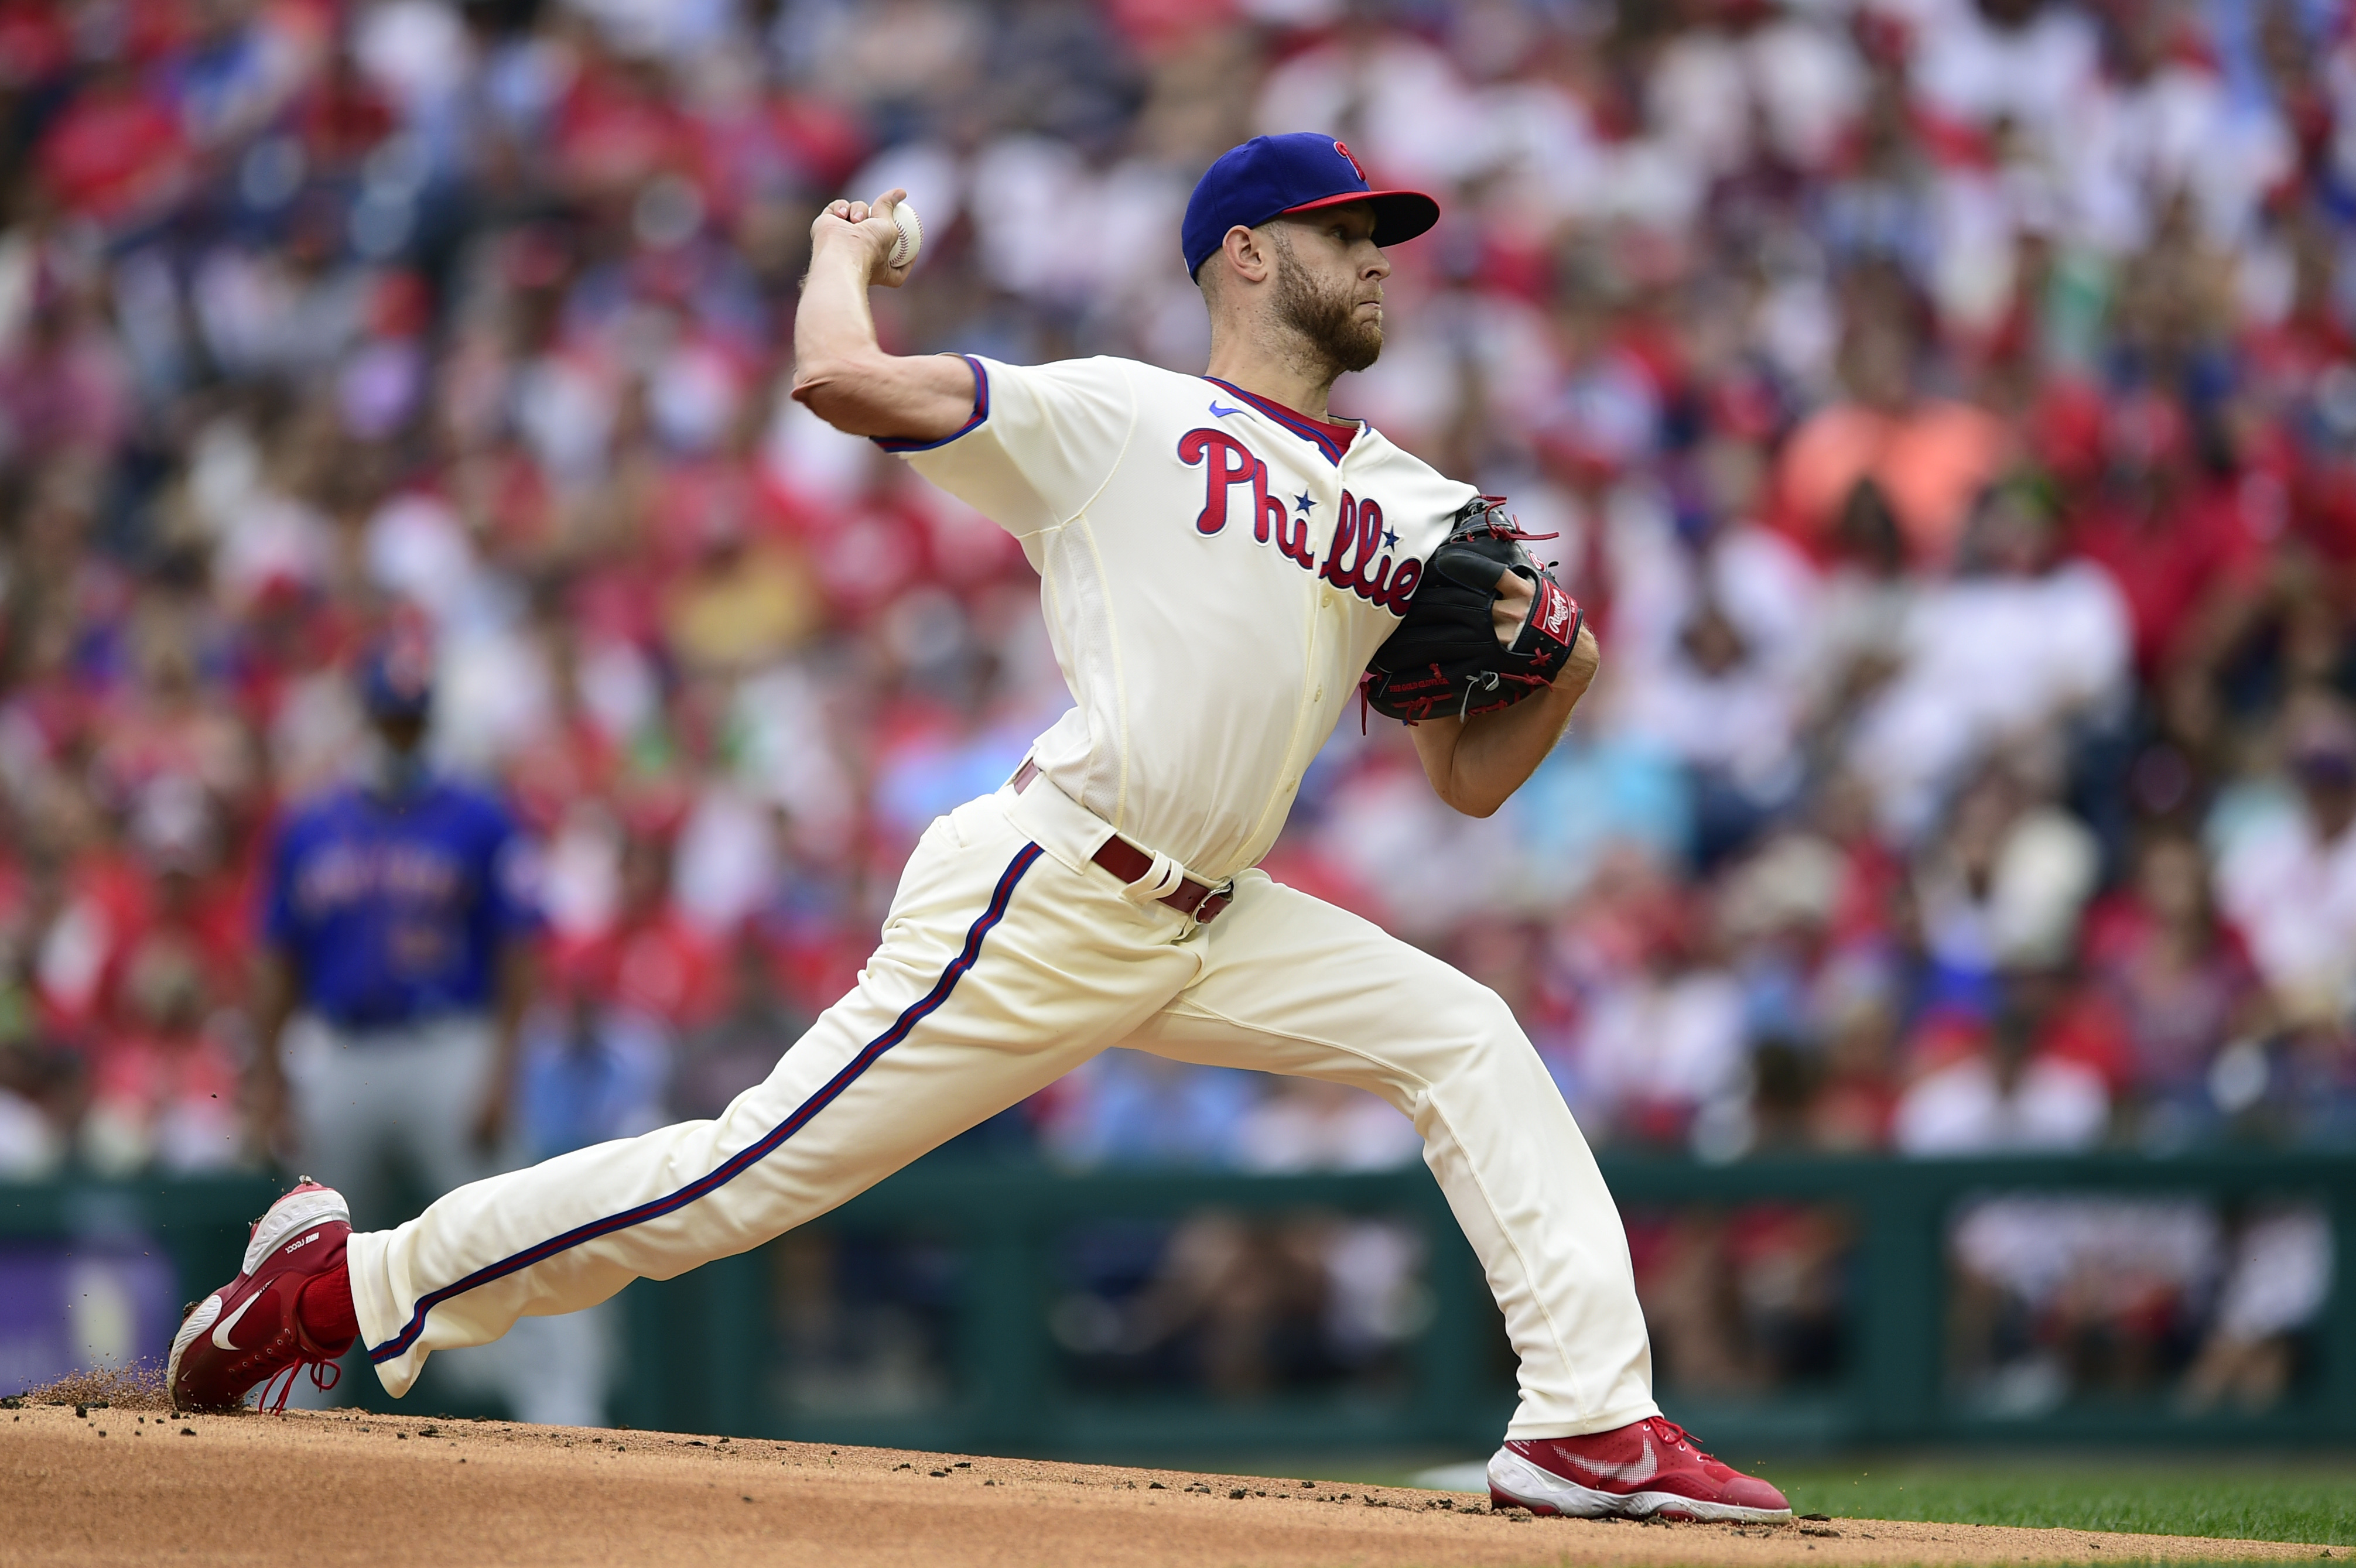 Phillies vs. Mets: Halladay Pitches Complete Game to Earn 2-1 Win